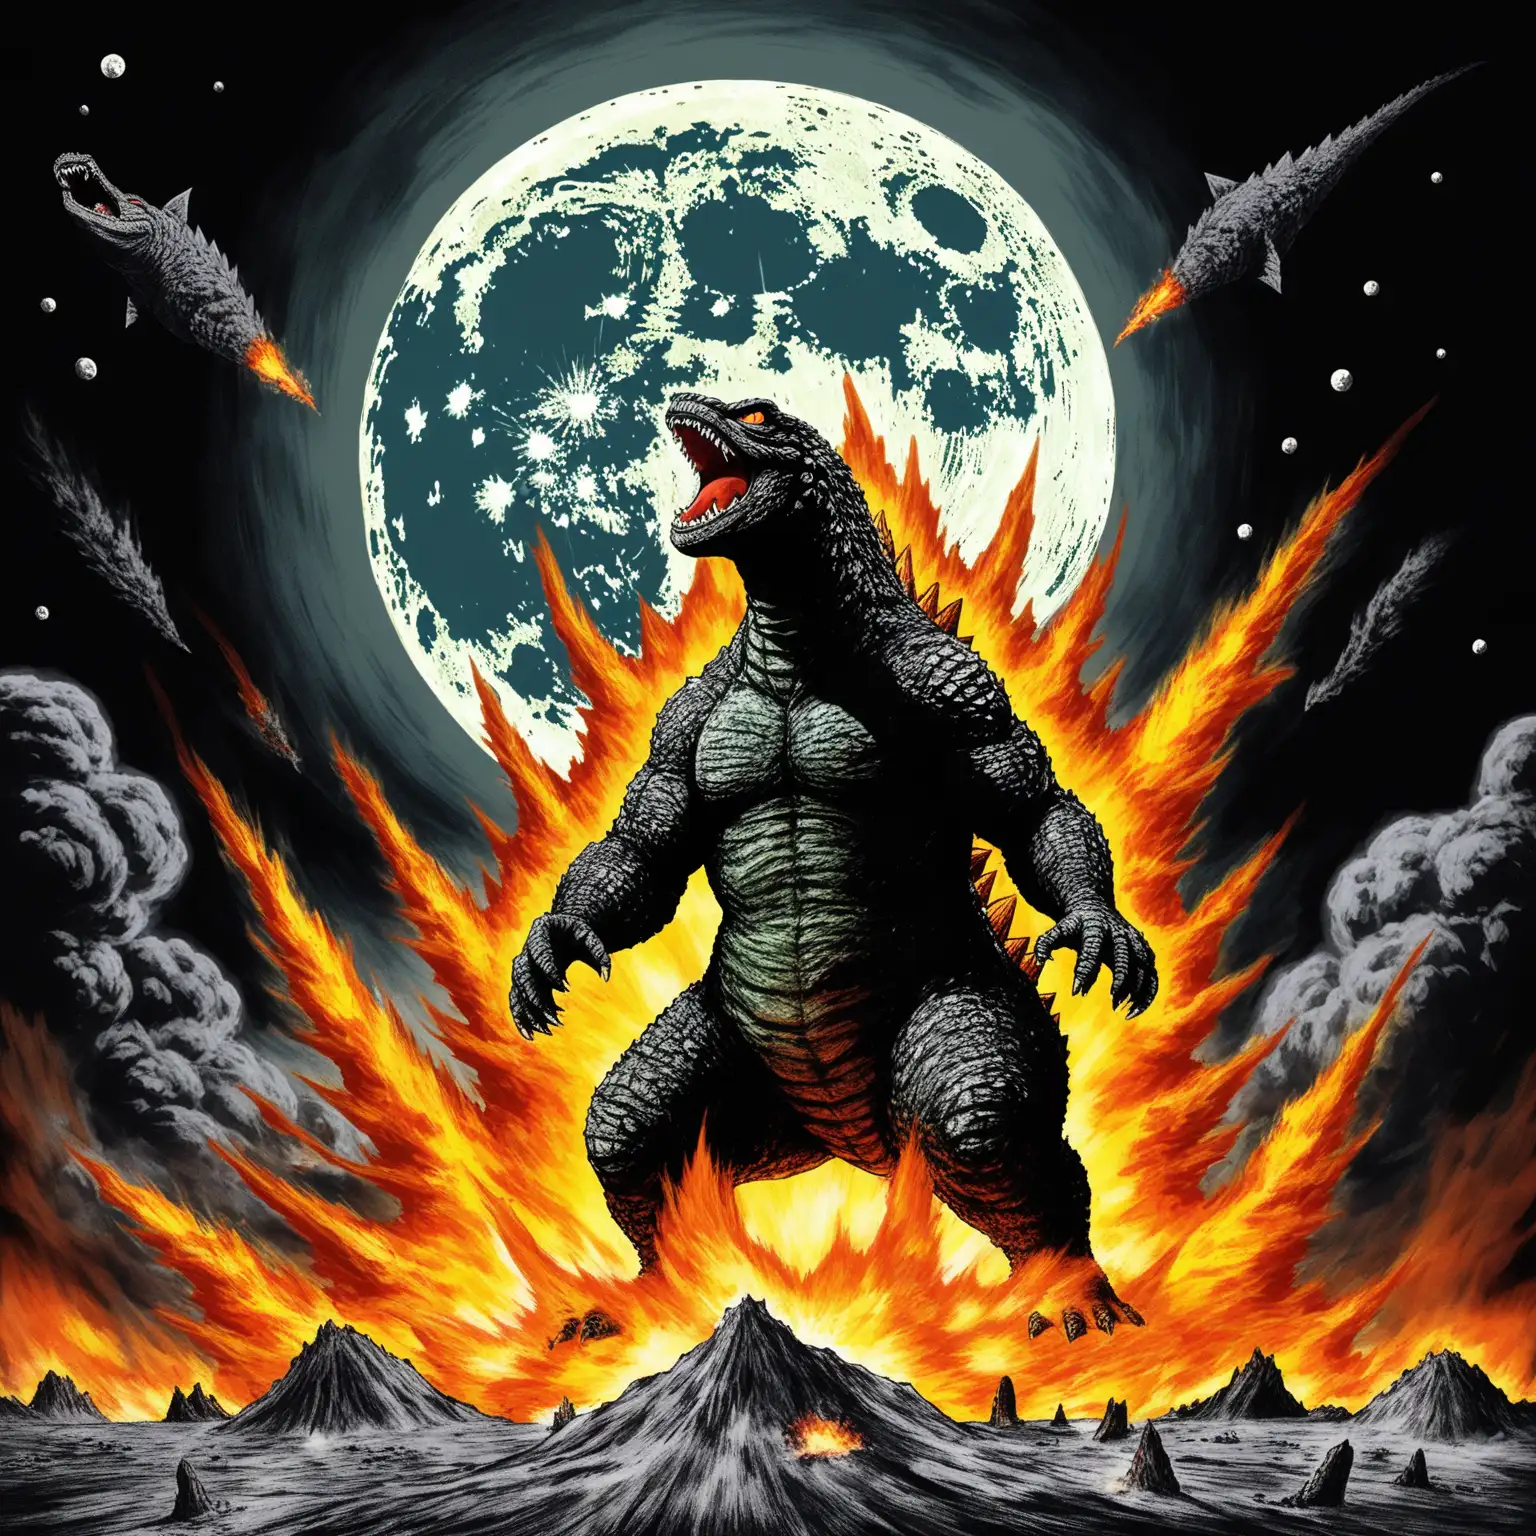 Godzilla with nuclear fire coming out of his mouth on the moon